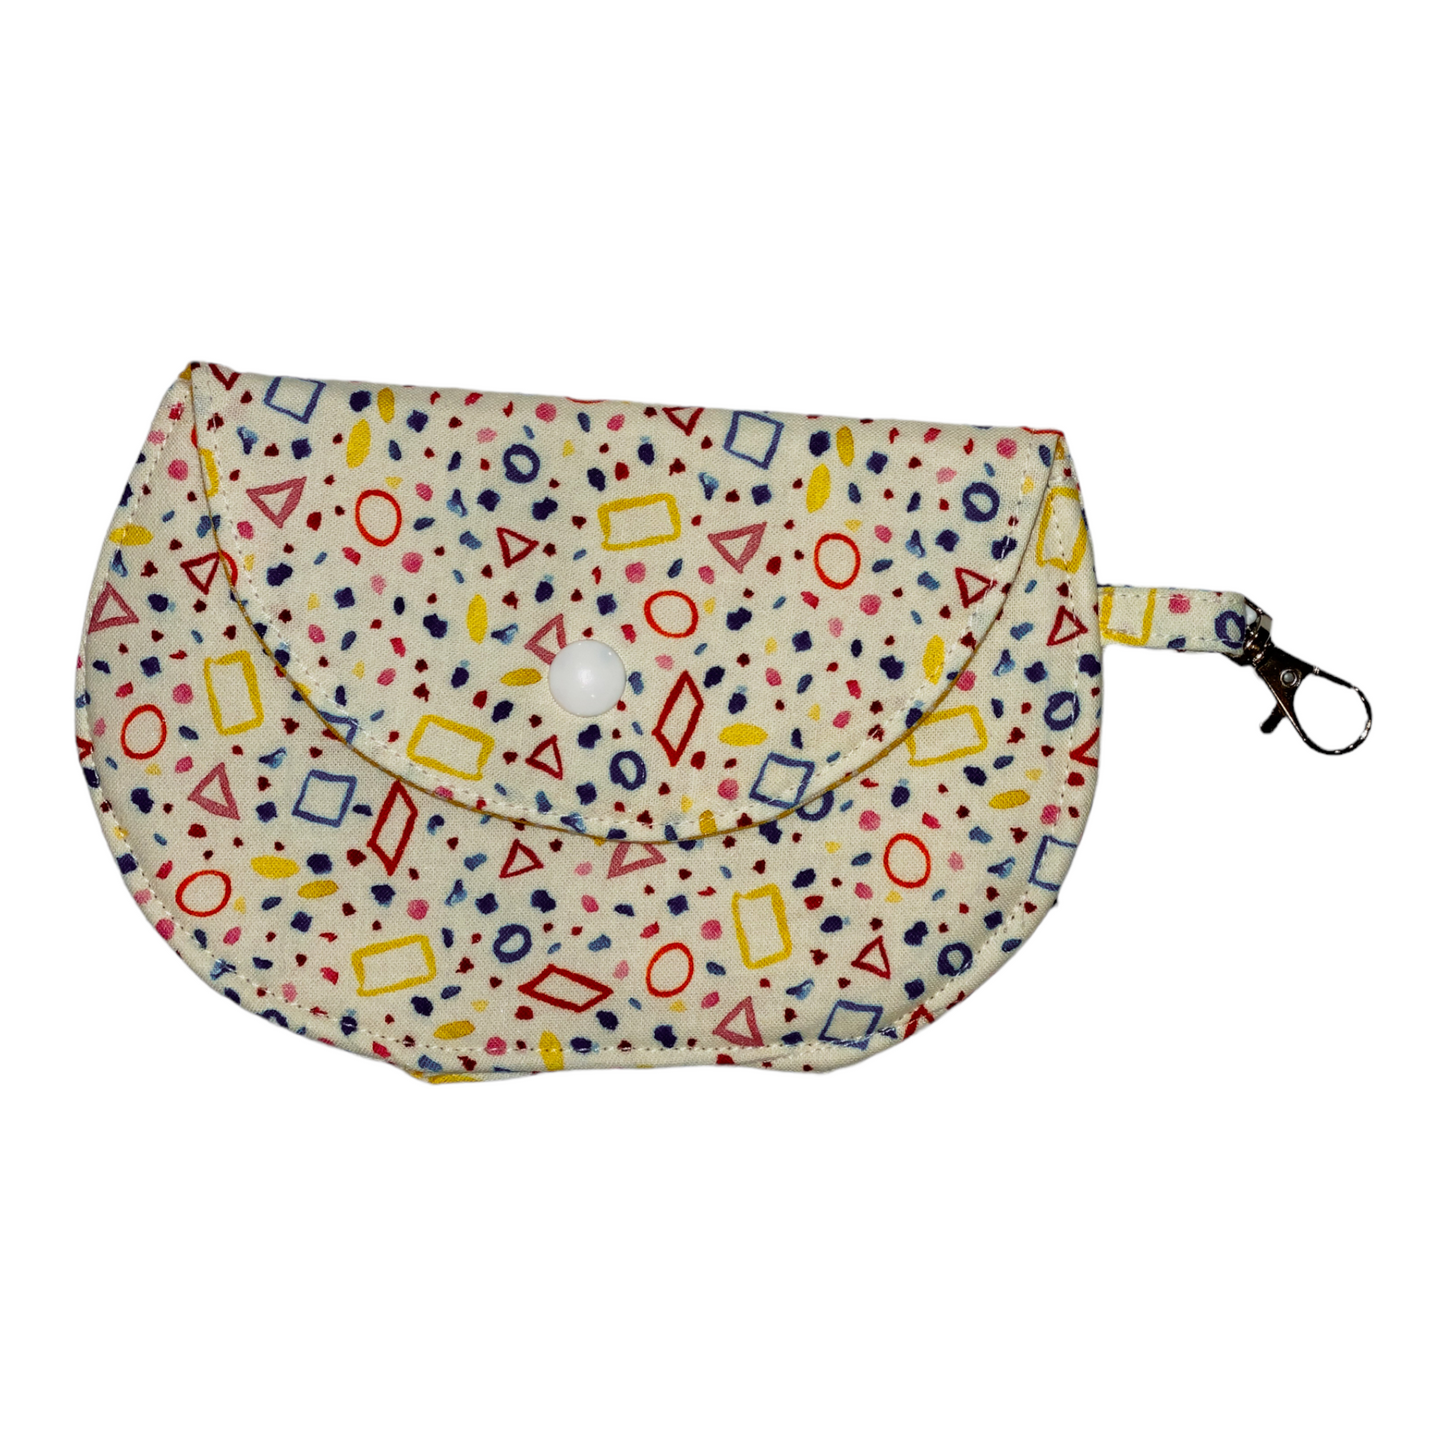 Keychain Wallet - Shapes and Dots